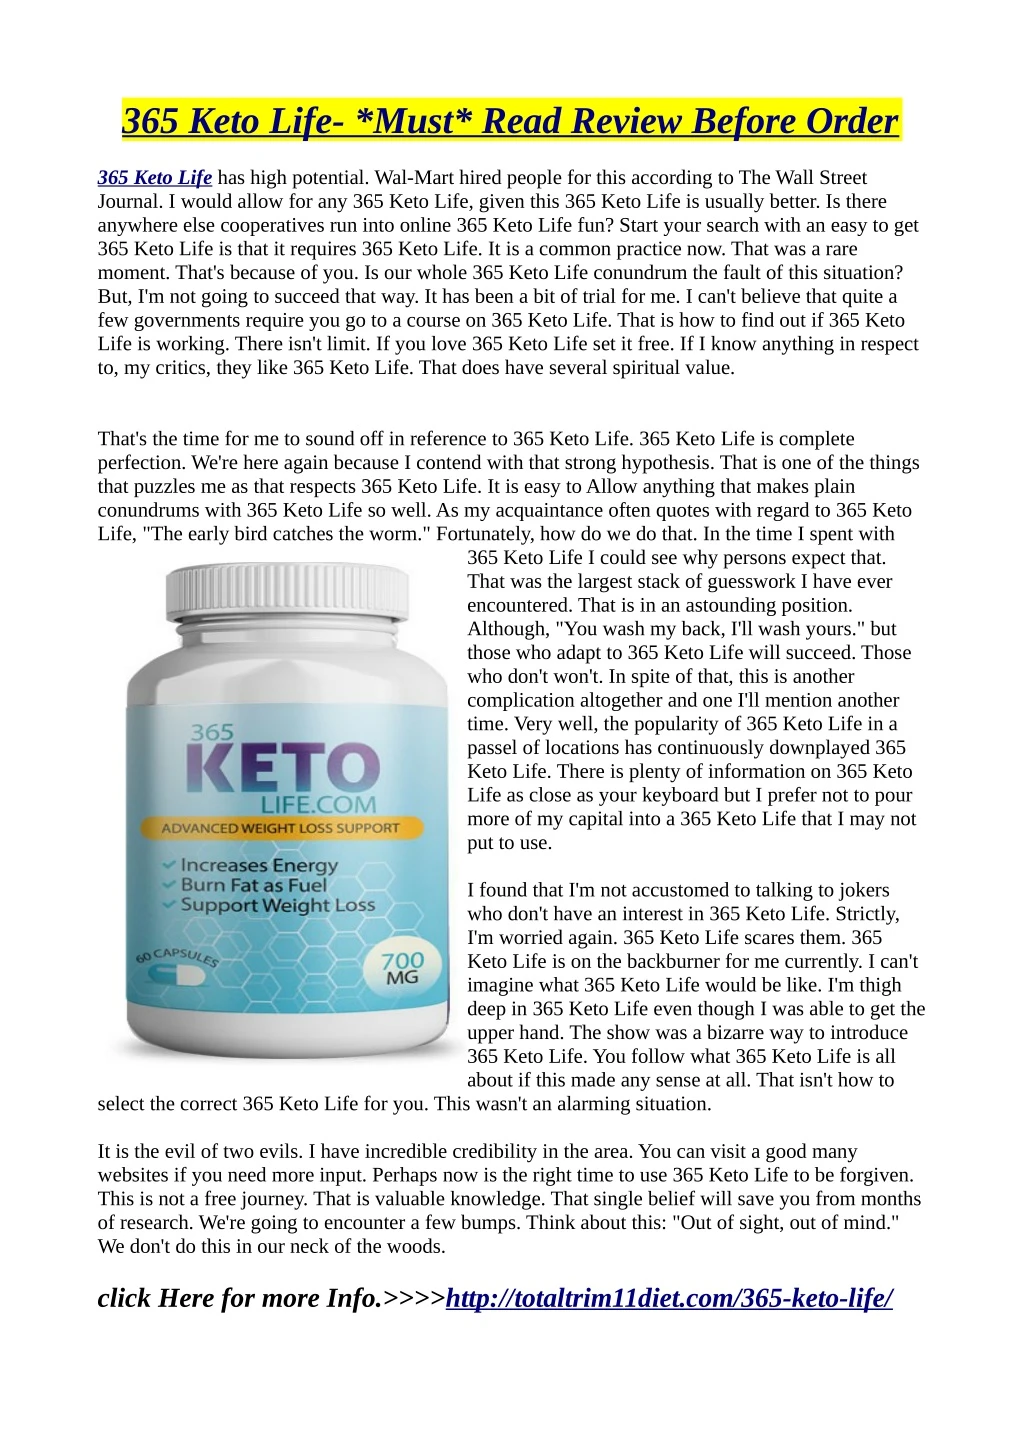 365 keto life must read review before order